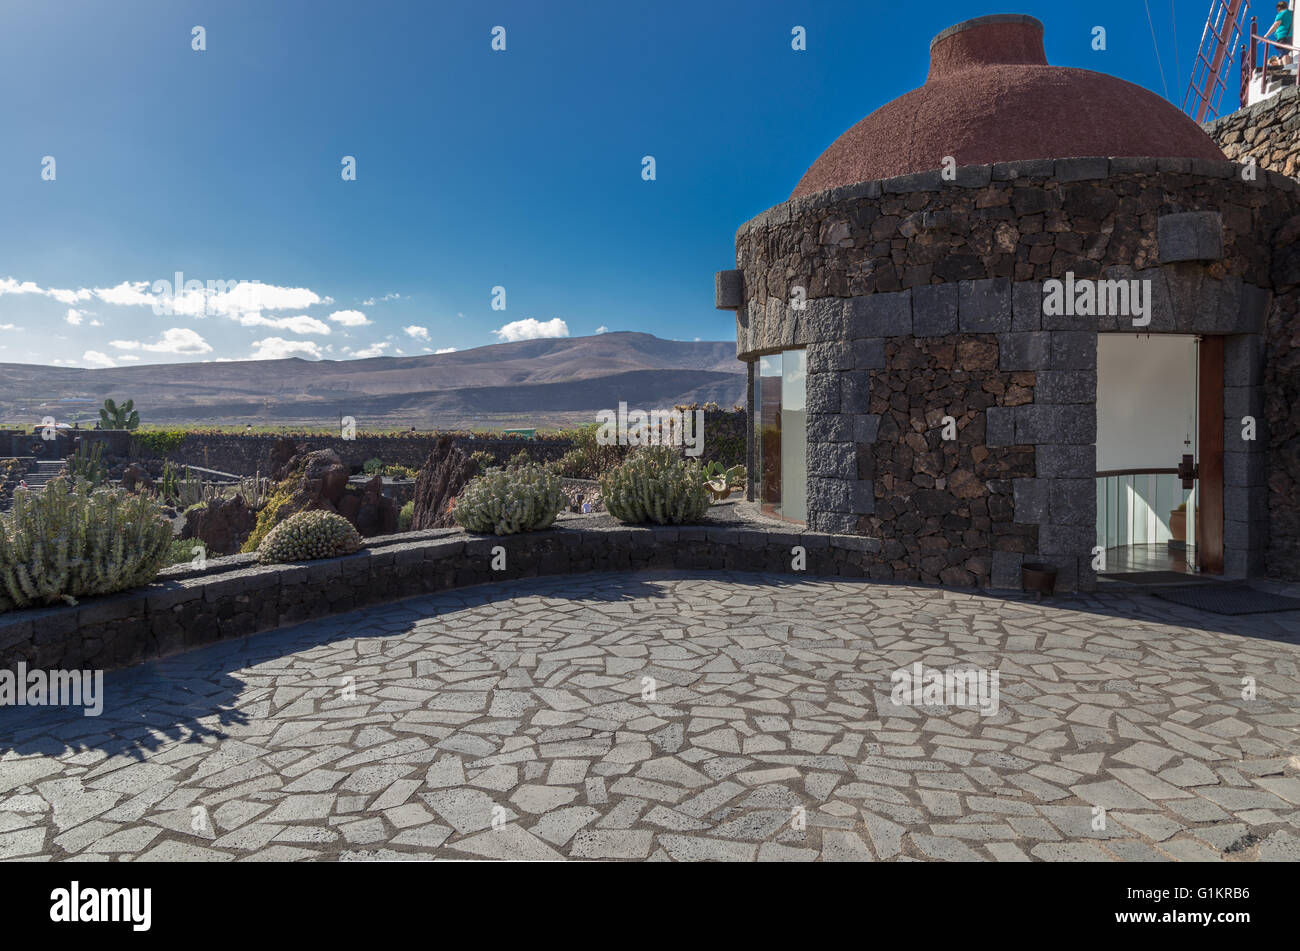 Entrance to the stairwell at the Lanzarote Cactus Garden. Designed by César Manrique. Stock Photo